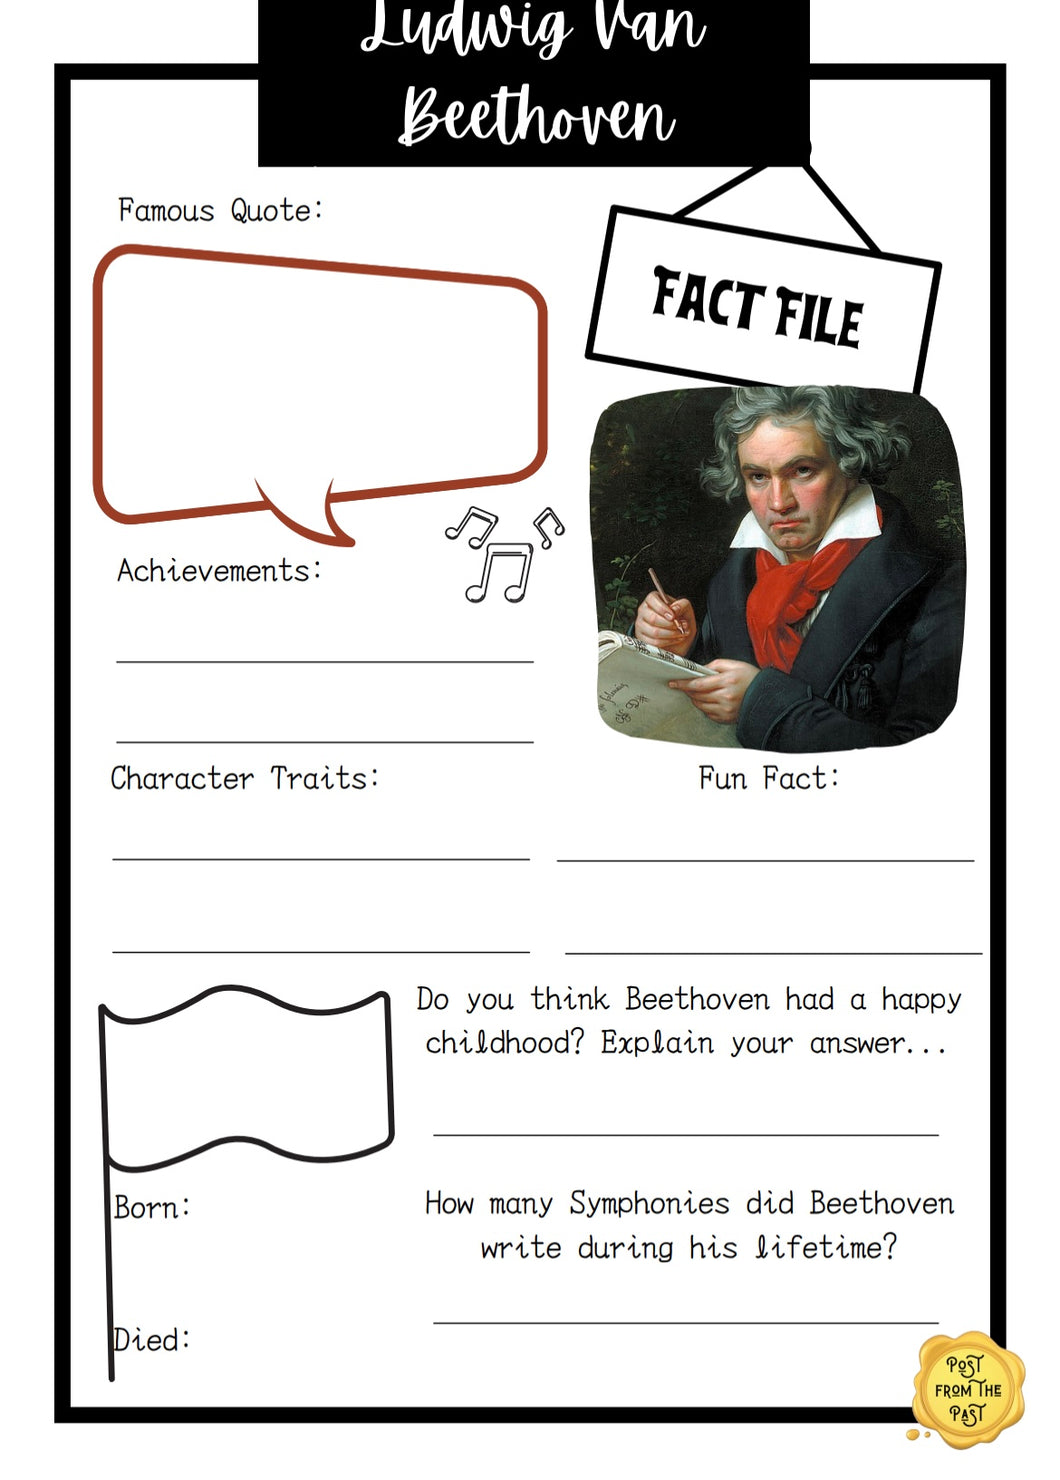 Beethoven Fact File